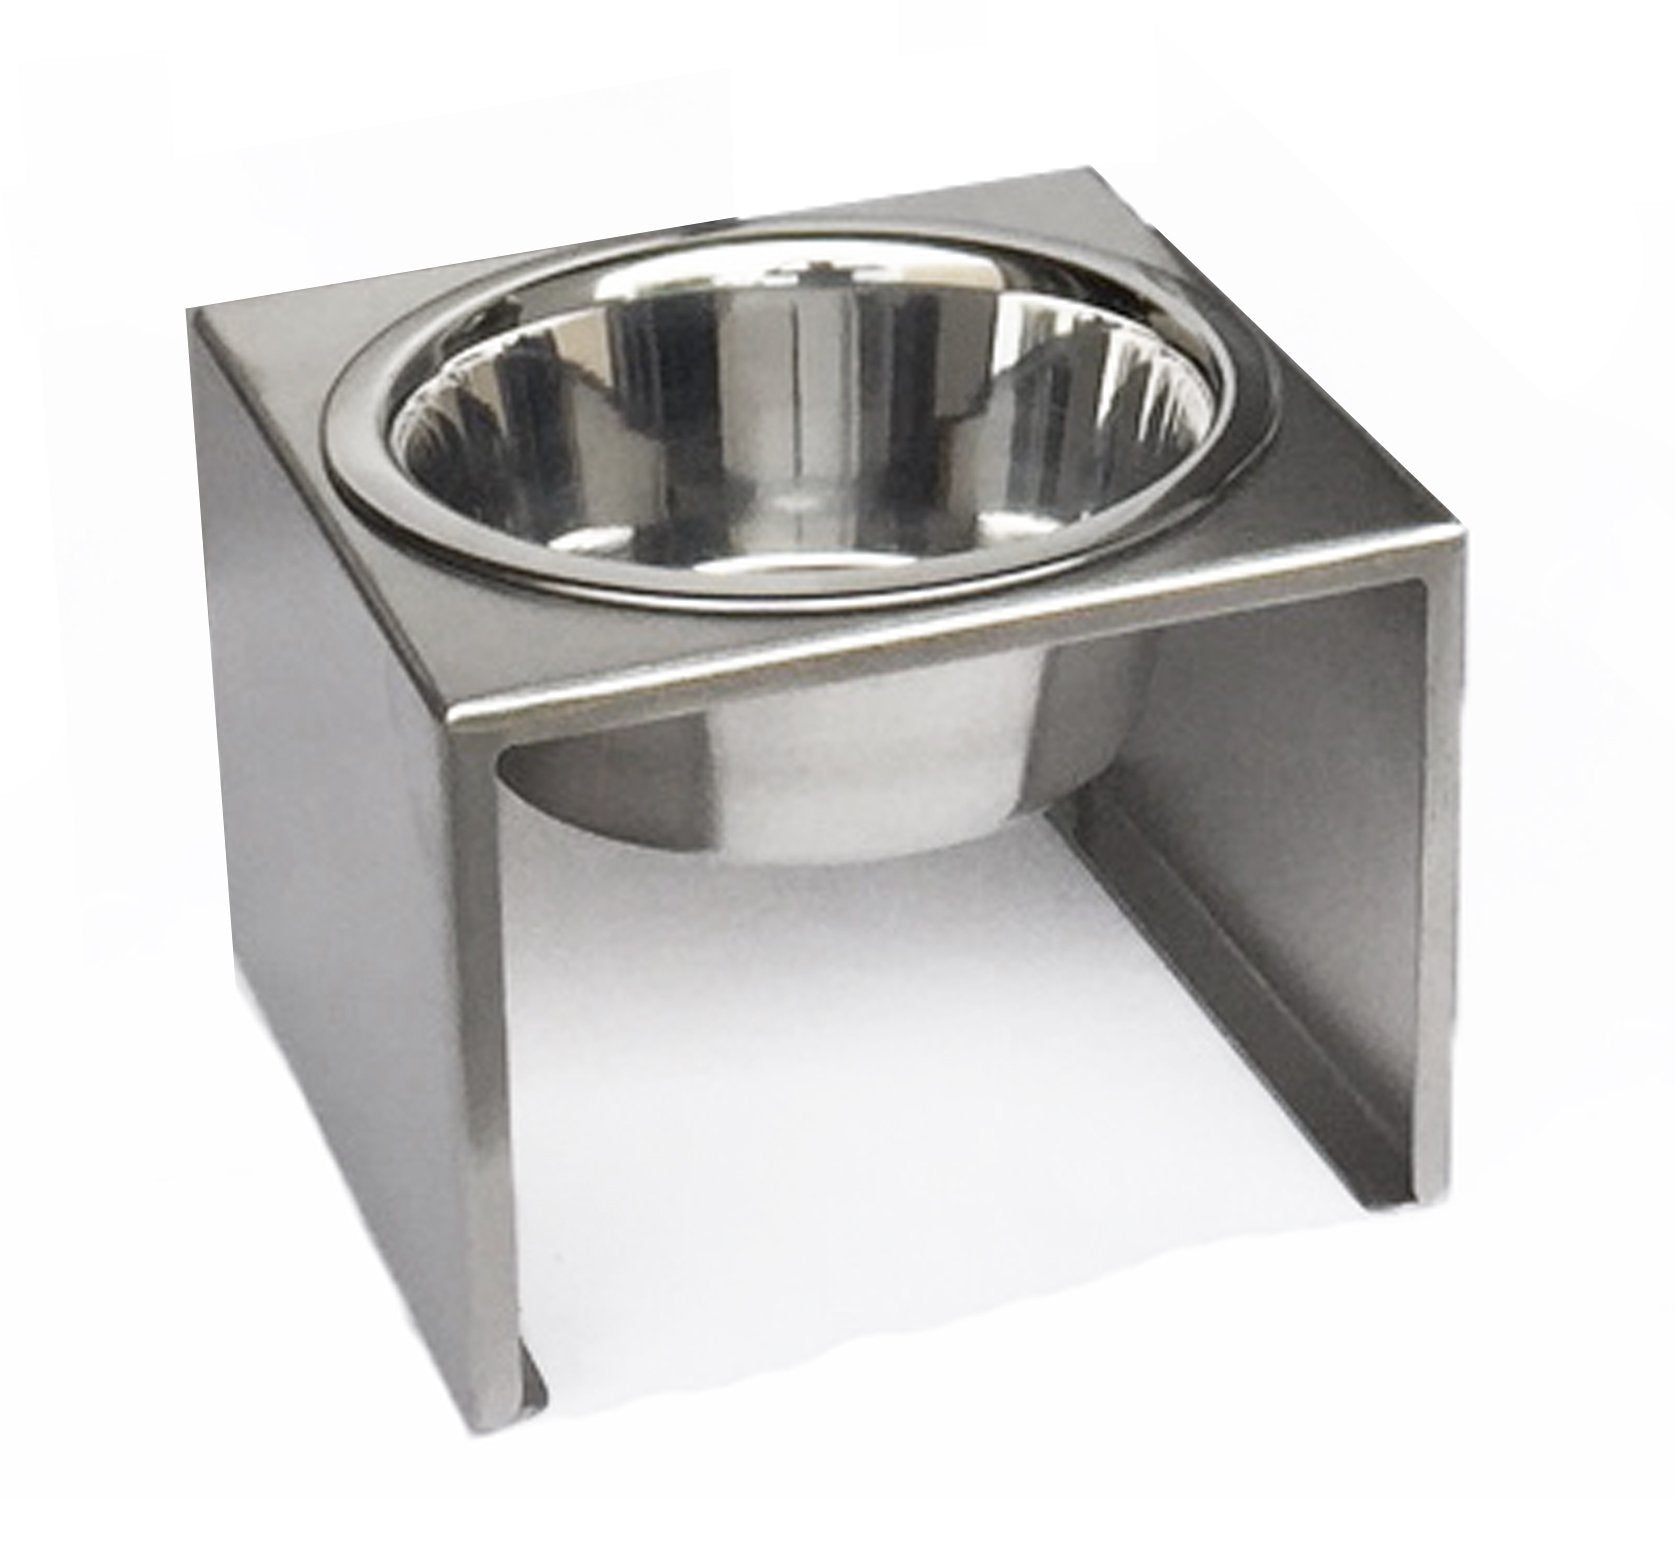 Slate. Modern Stainless Steel Elevated 2 Dog Bowl Stand. S - L Dog